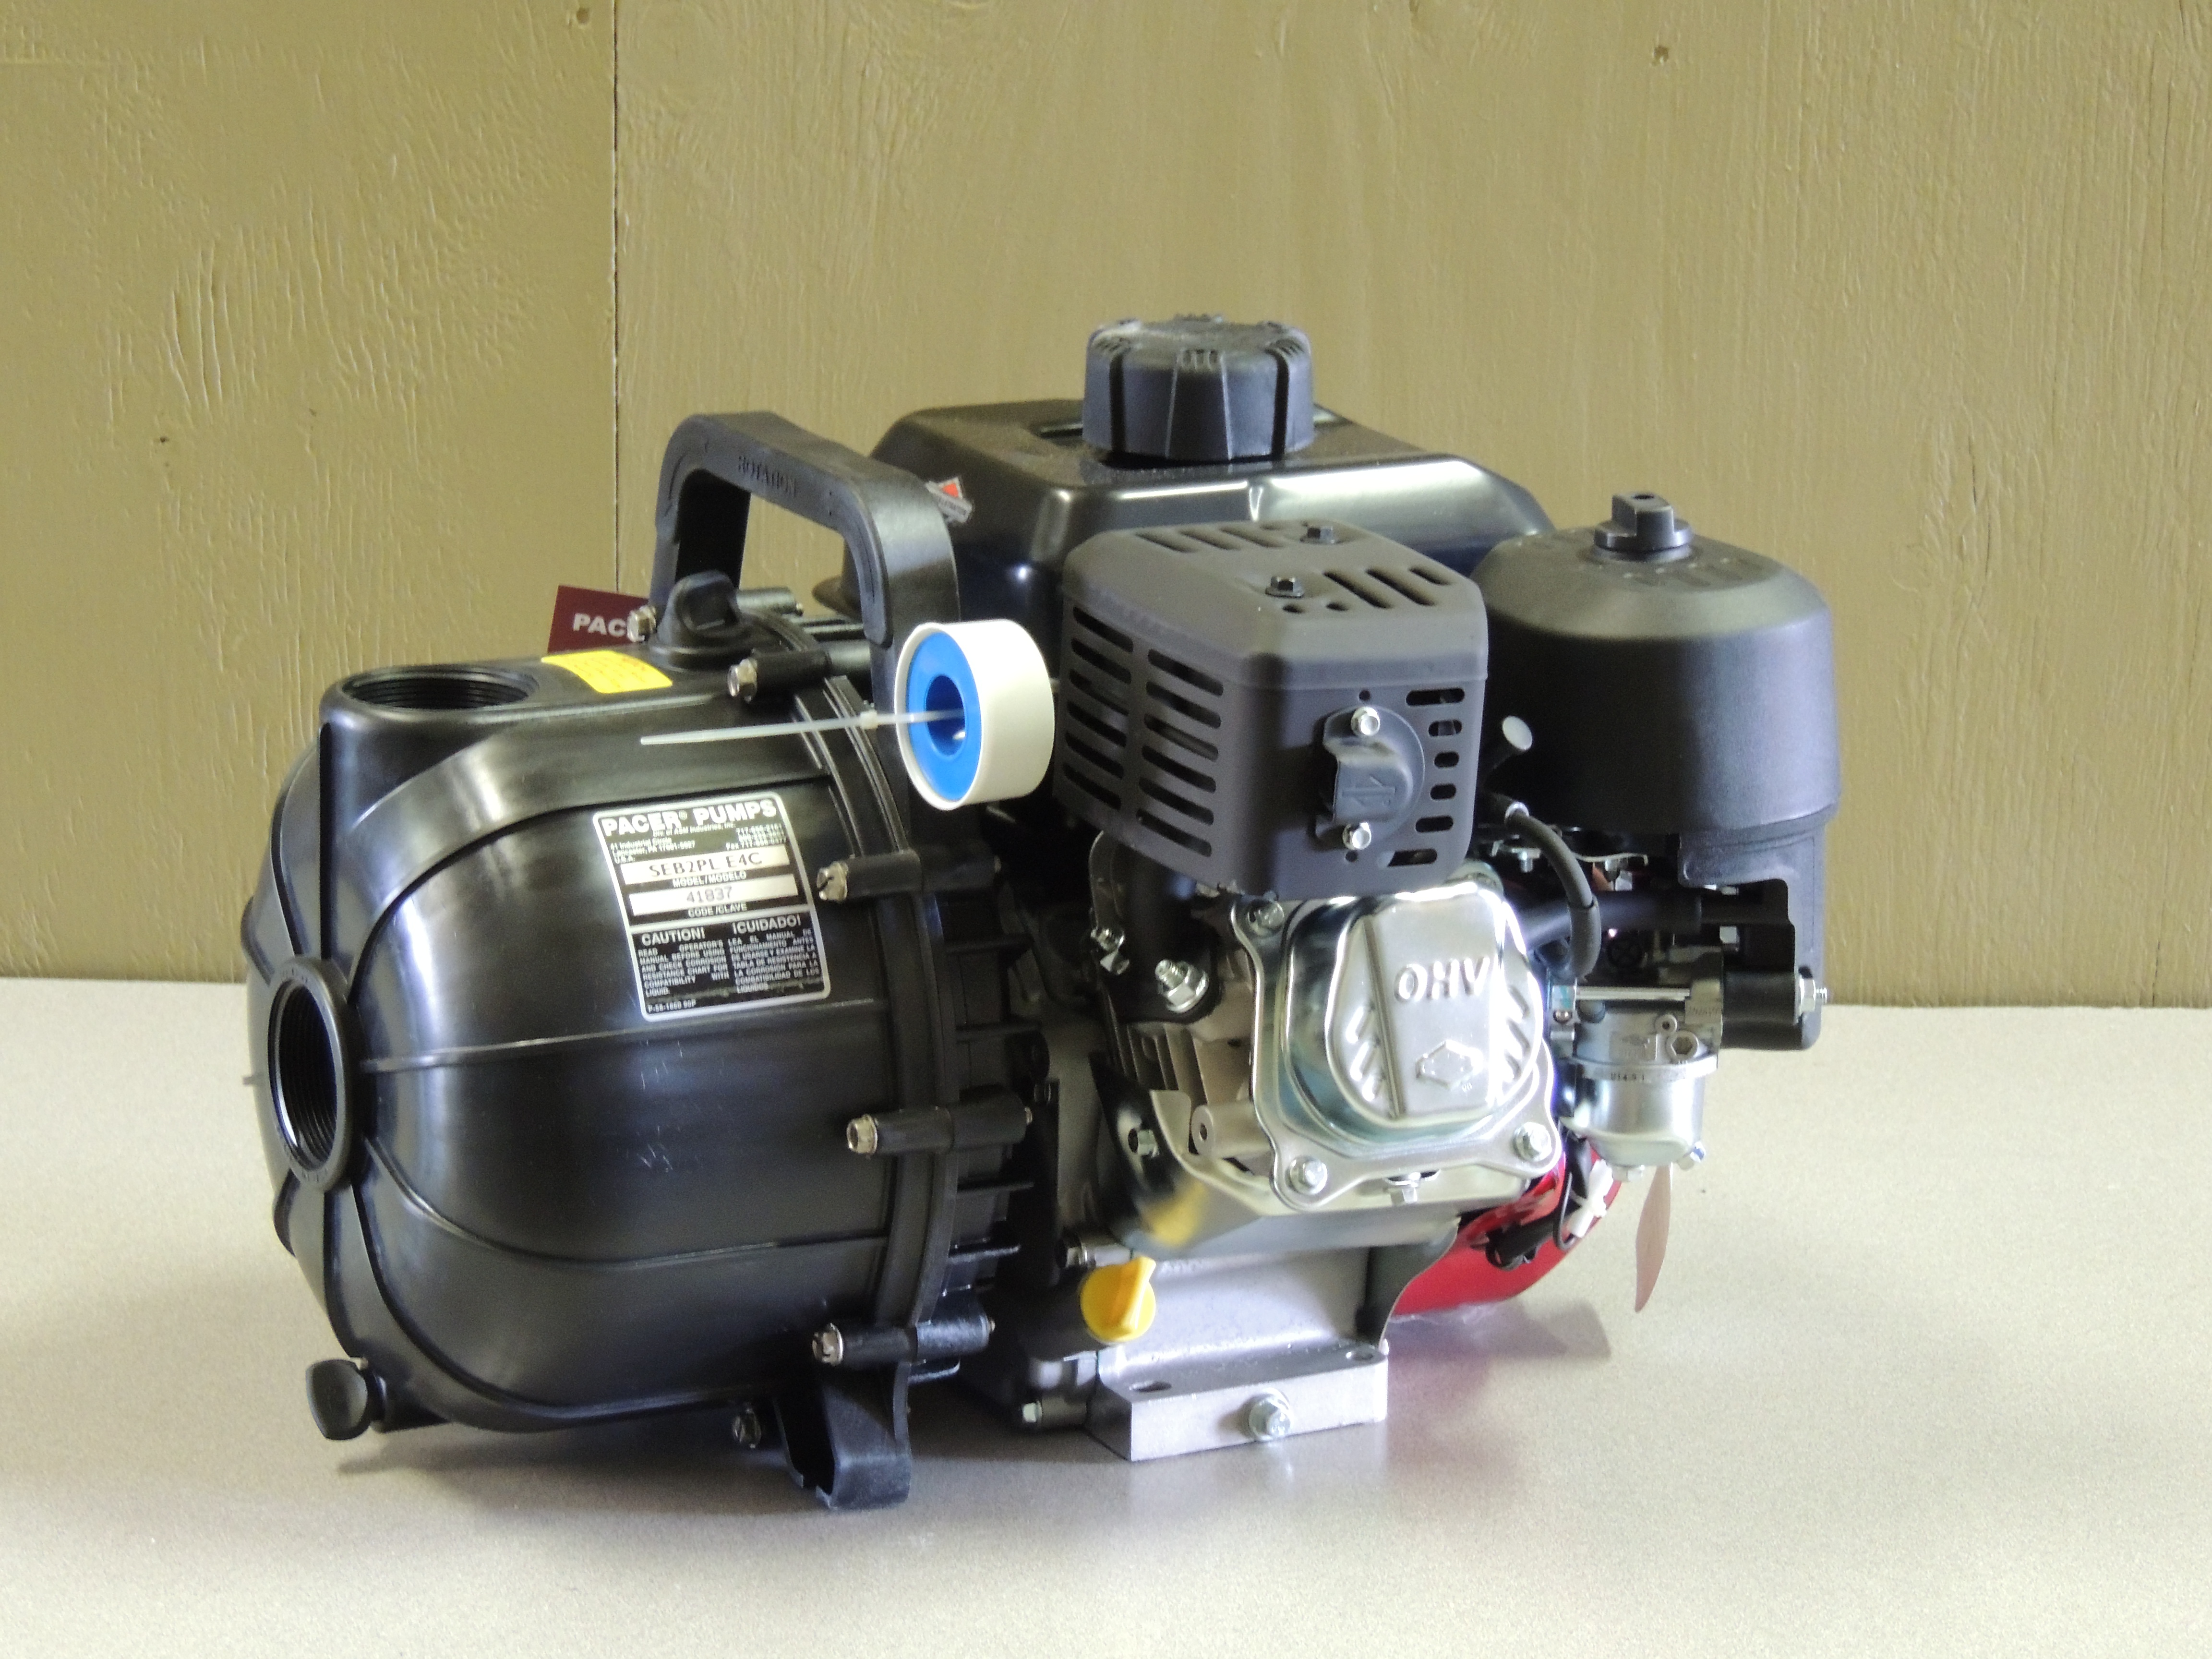 Pacer Transfer Pump 3.5 hp Photo